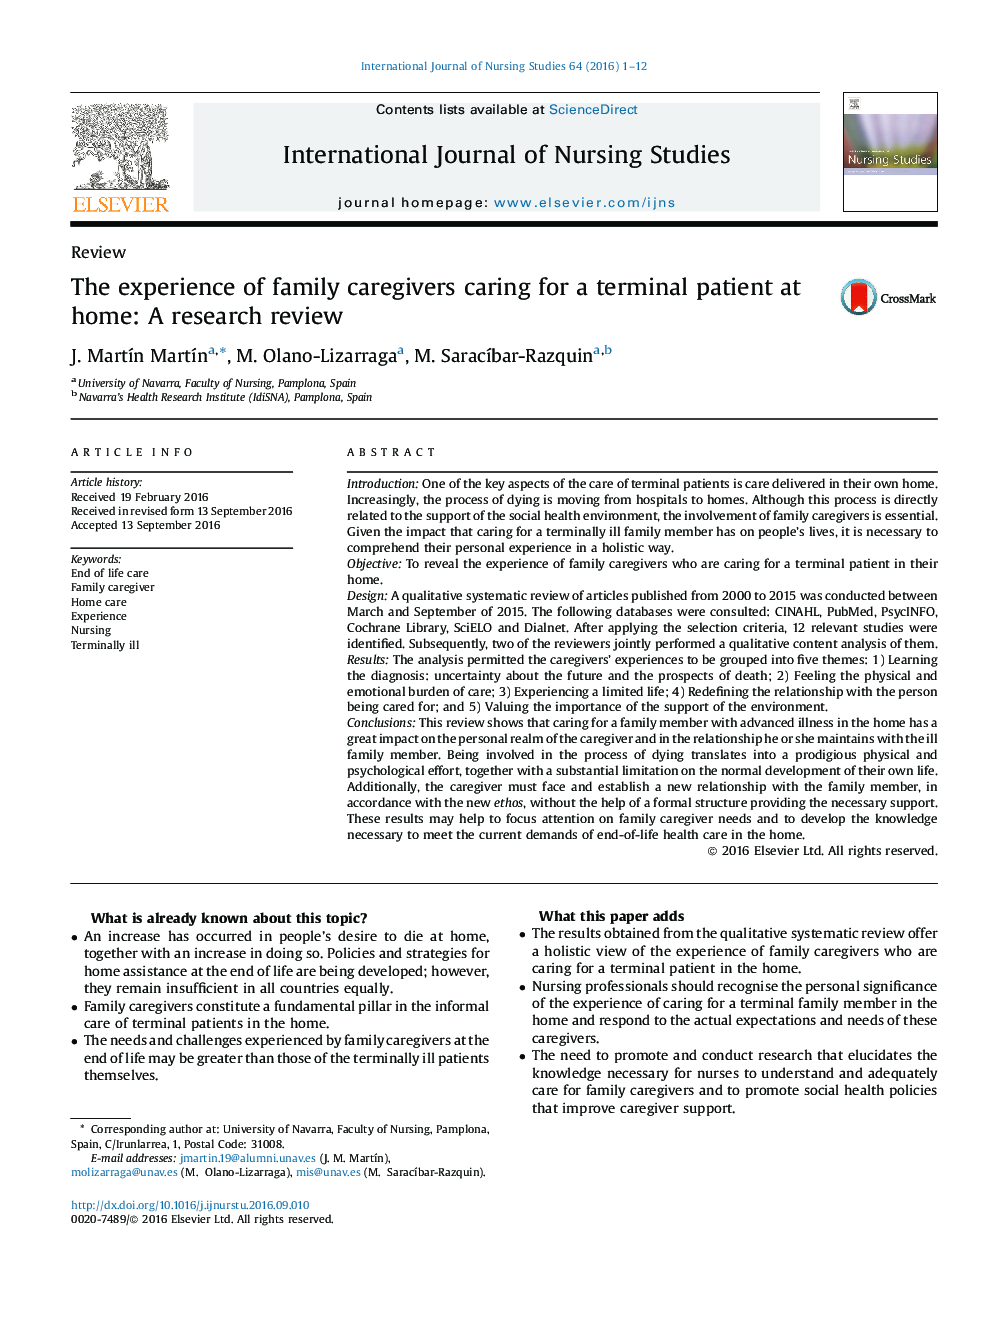 The experience of family caregivers caring for a terminal patient at home: A research review